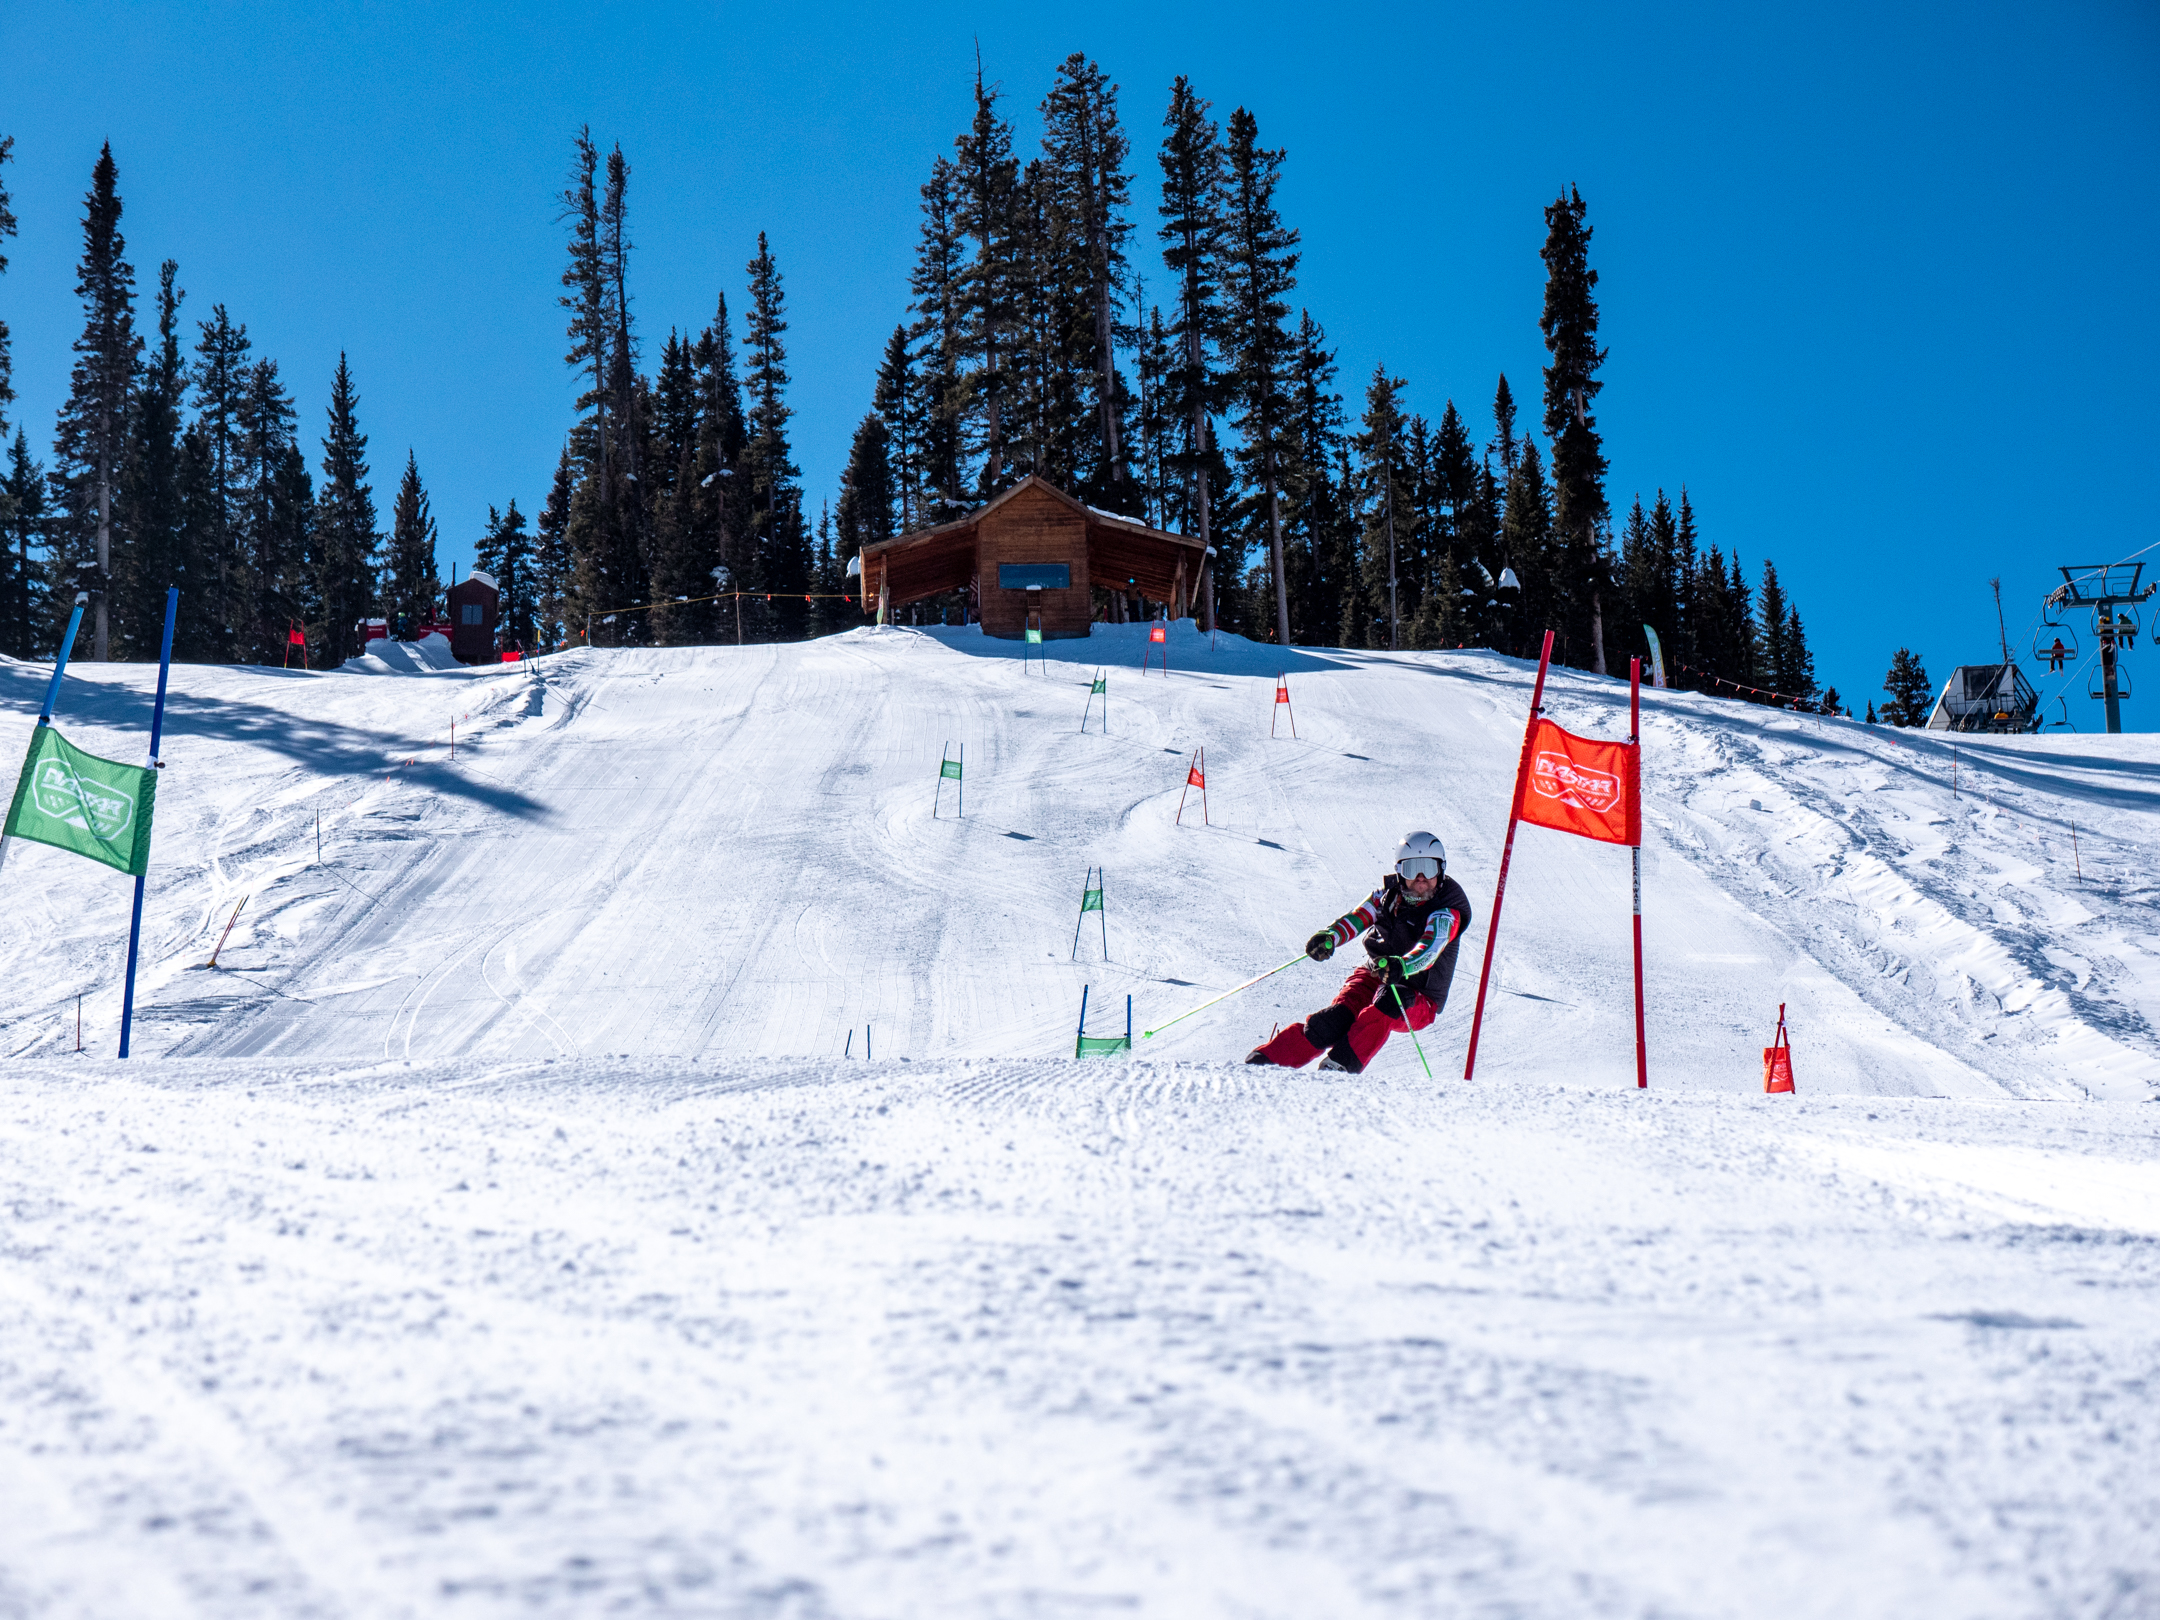 A skier leans into the turn as he races down a slalom course